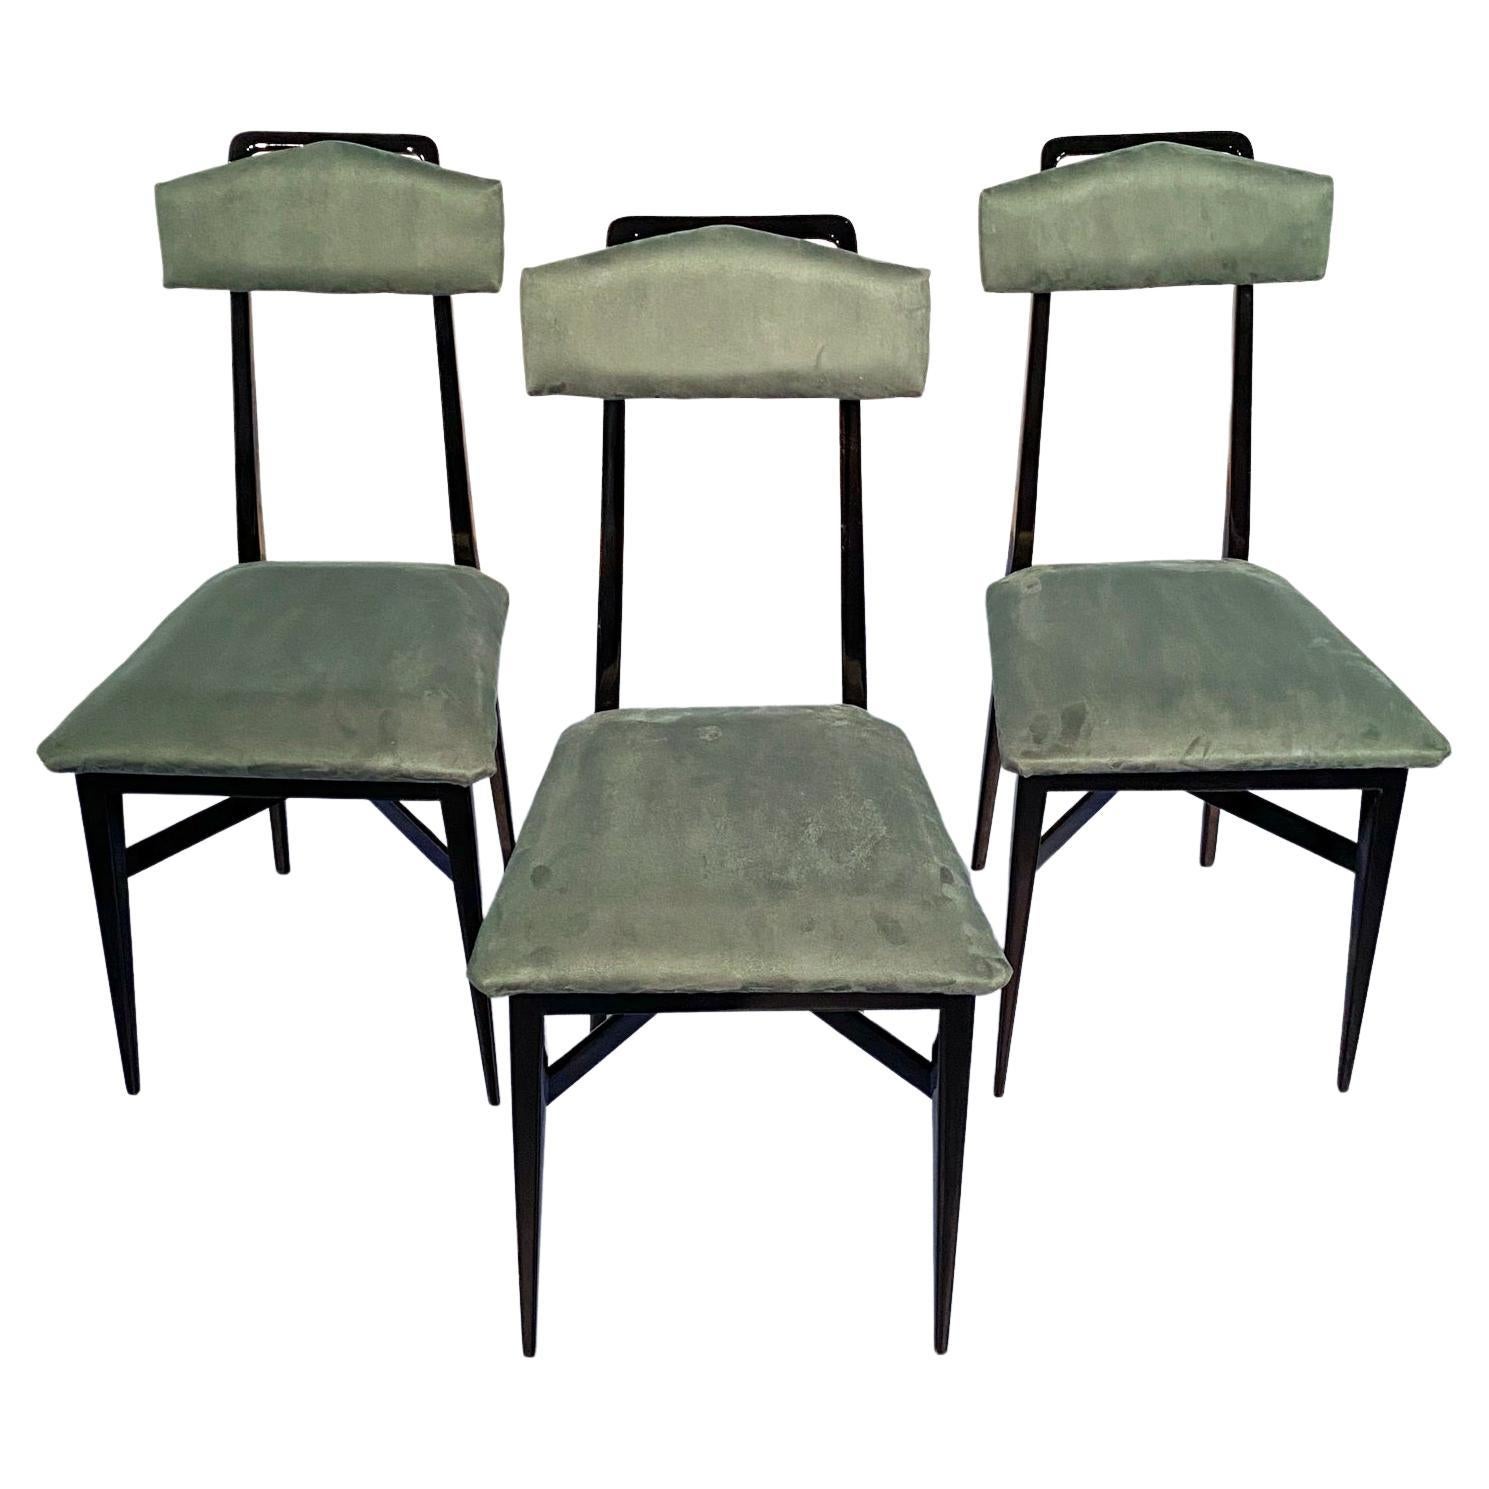 Mid-Century Modern Italian Mid-Century Black and Green Color Dining Chairs, Set of Six, 1950s For Sale